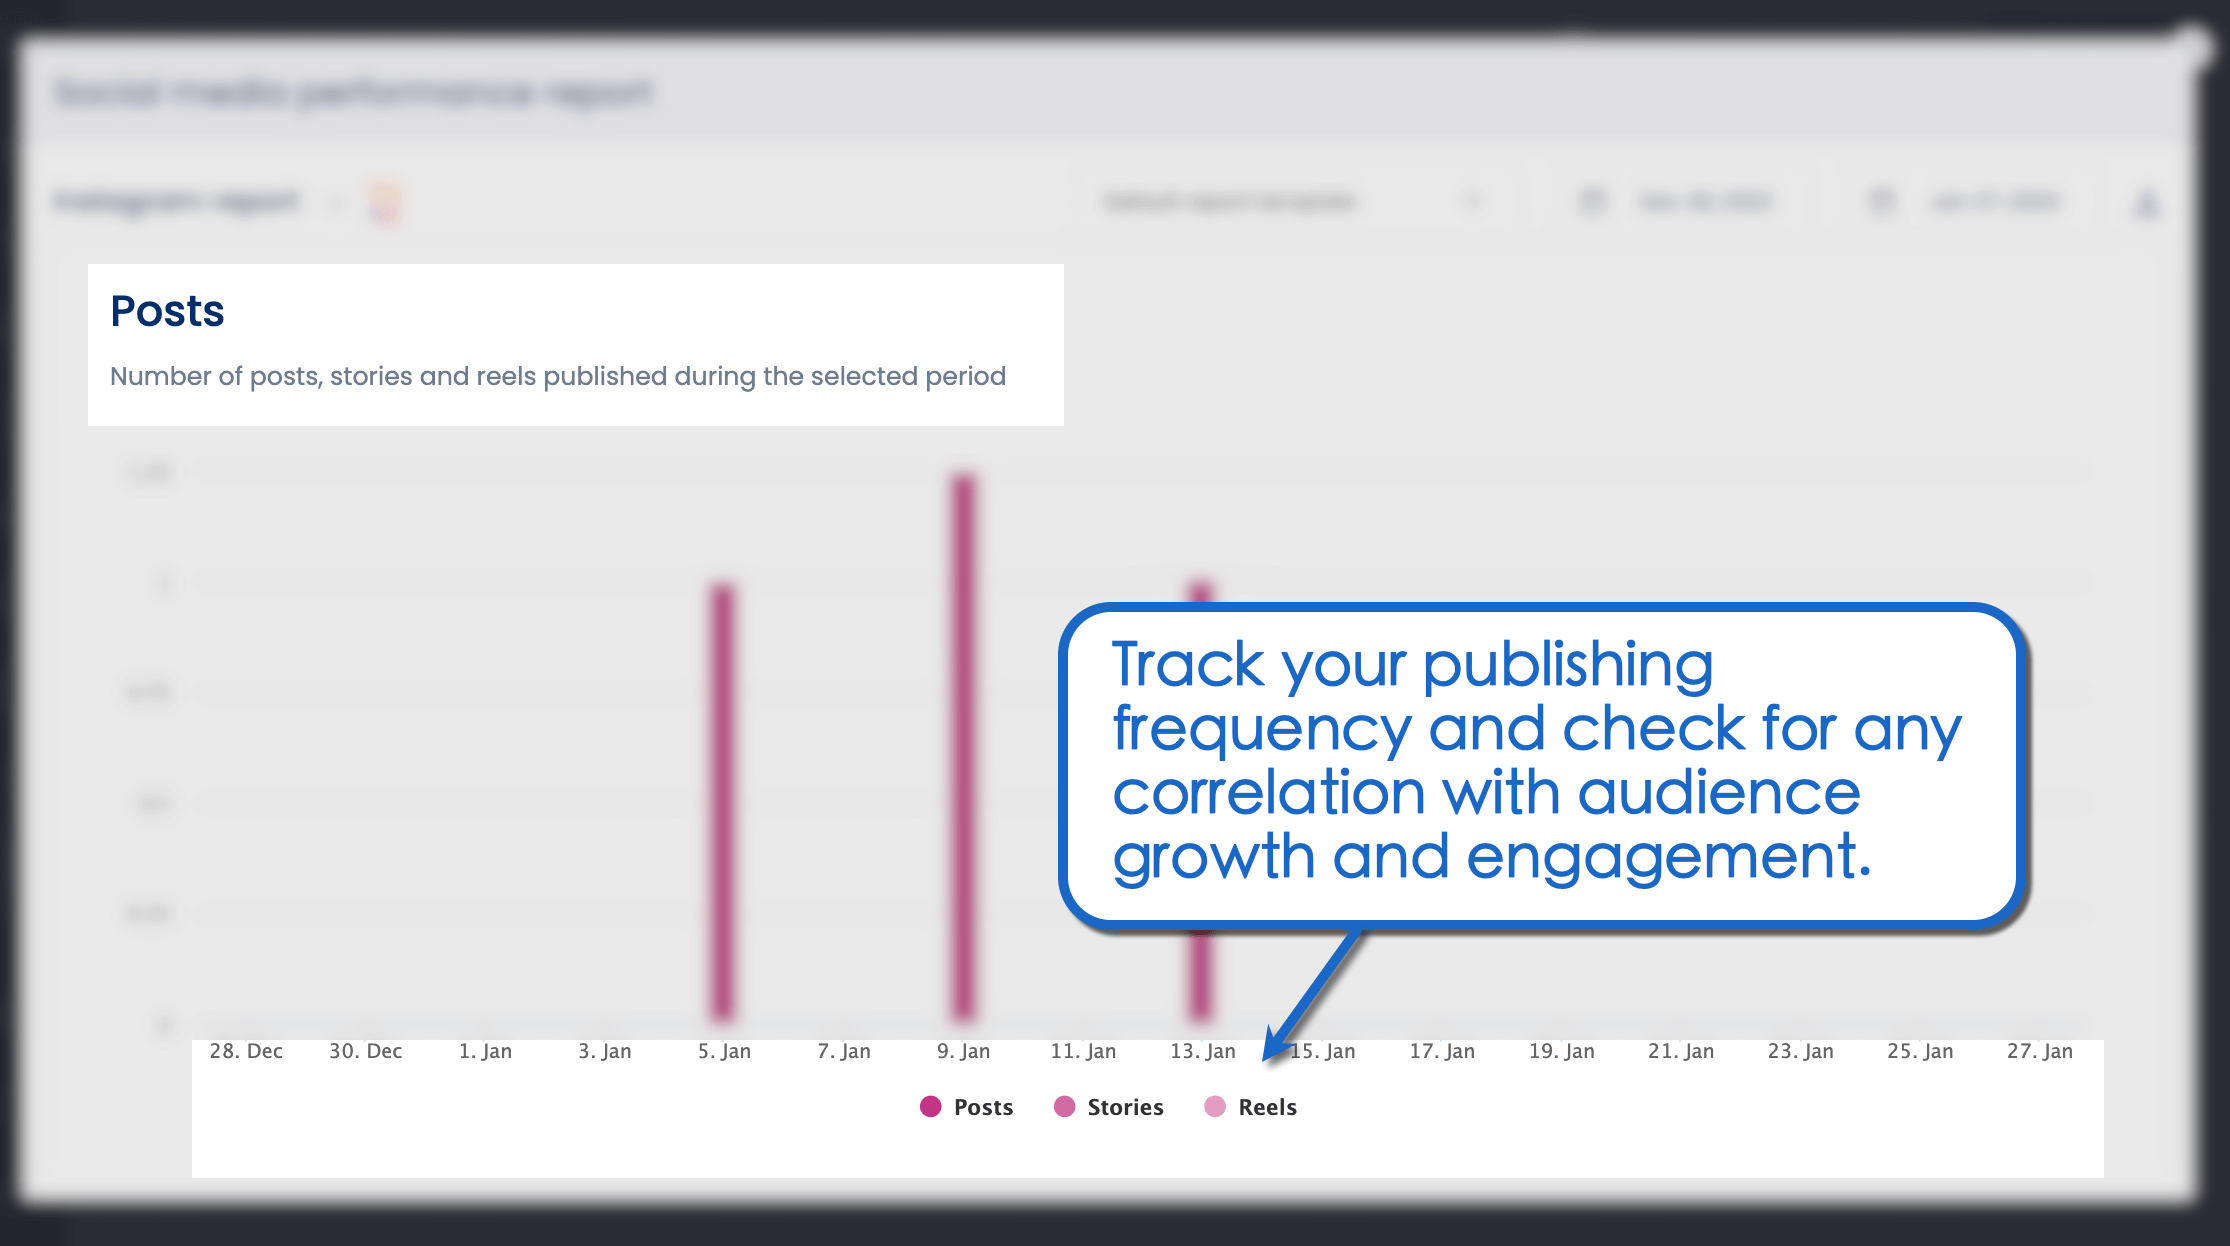 Track your publishing frequency.